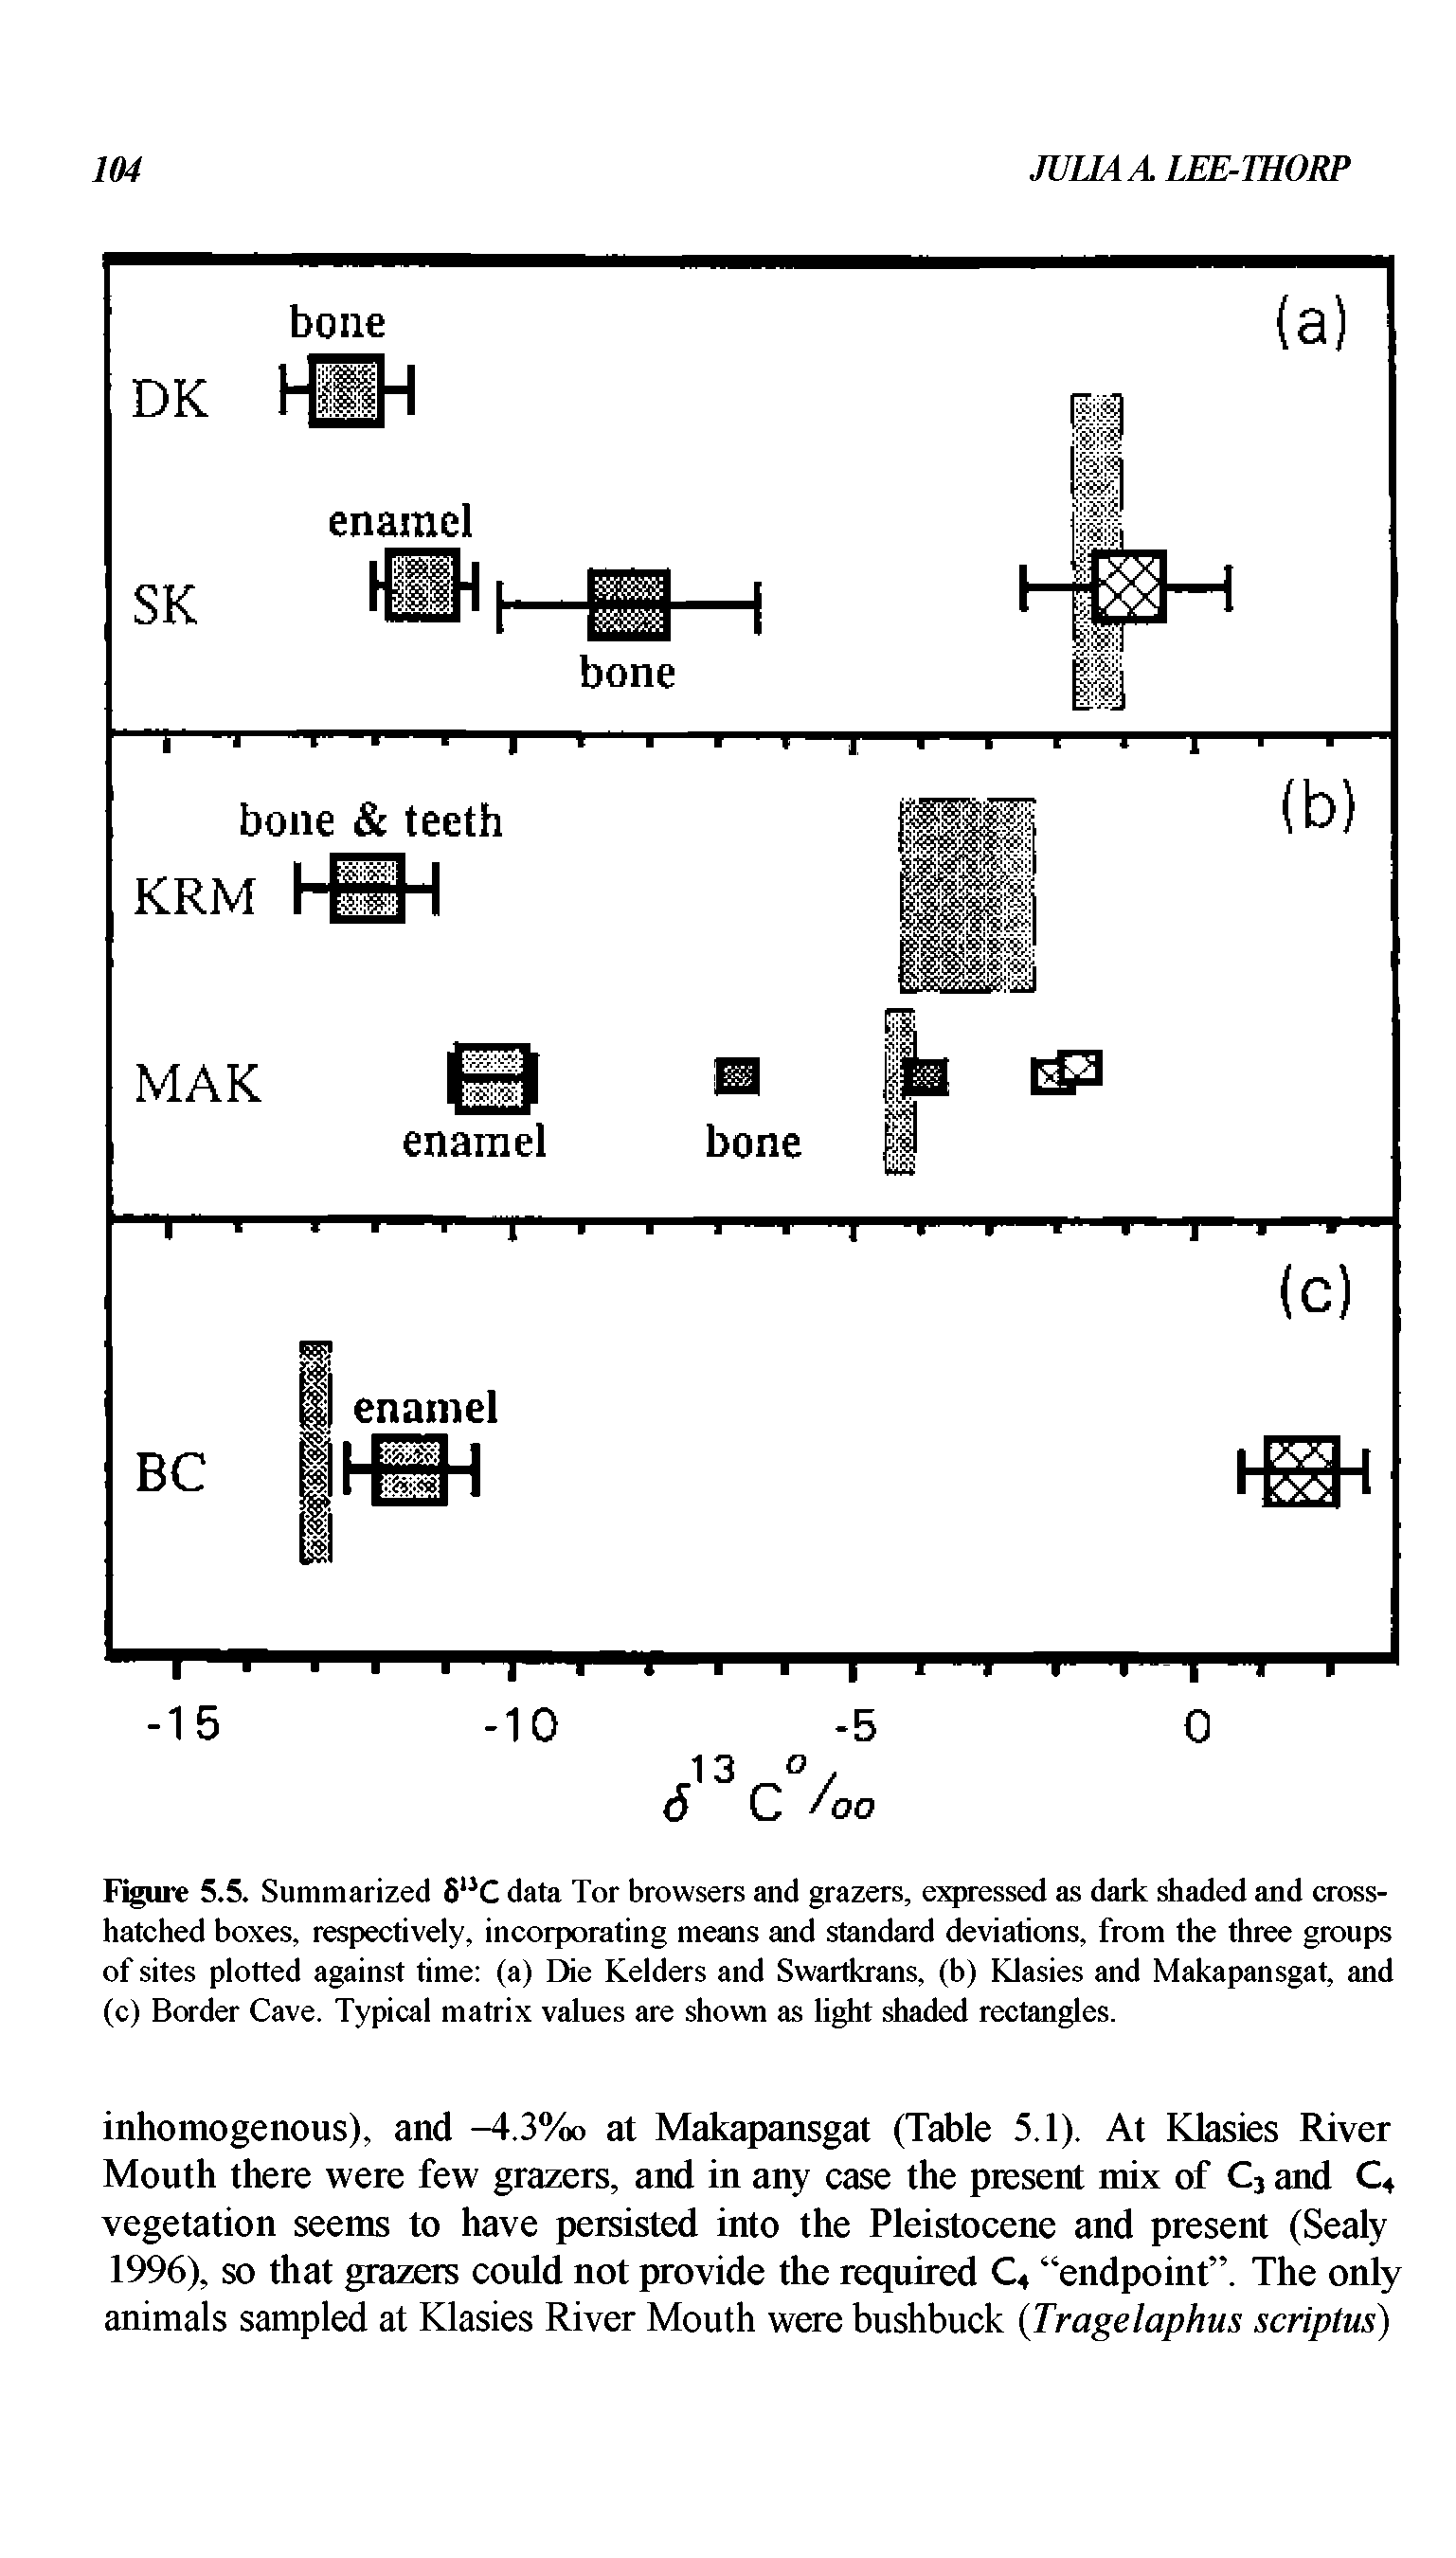 Figure 5.5. Summarized 6 C data Tor browsers and grazers, expressed as dark shaded and cross-hatched boxes, respectively, incorporating means and standard deviations, from the three groups of sites plotted against time (a) Die Kelders and Swartkrans, (b) Klasies and Makapansgat, and (c) Border Cave. Typical matrix values are shown as light shaded rectangles.